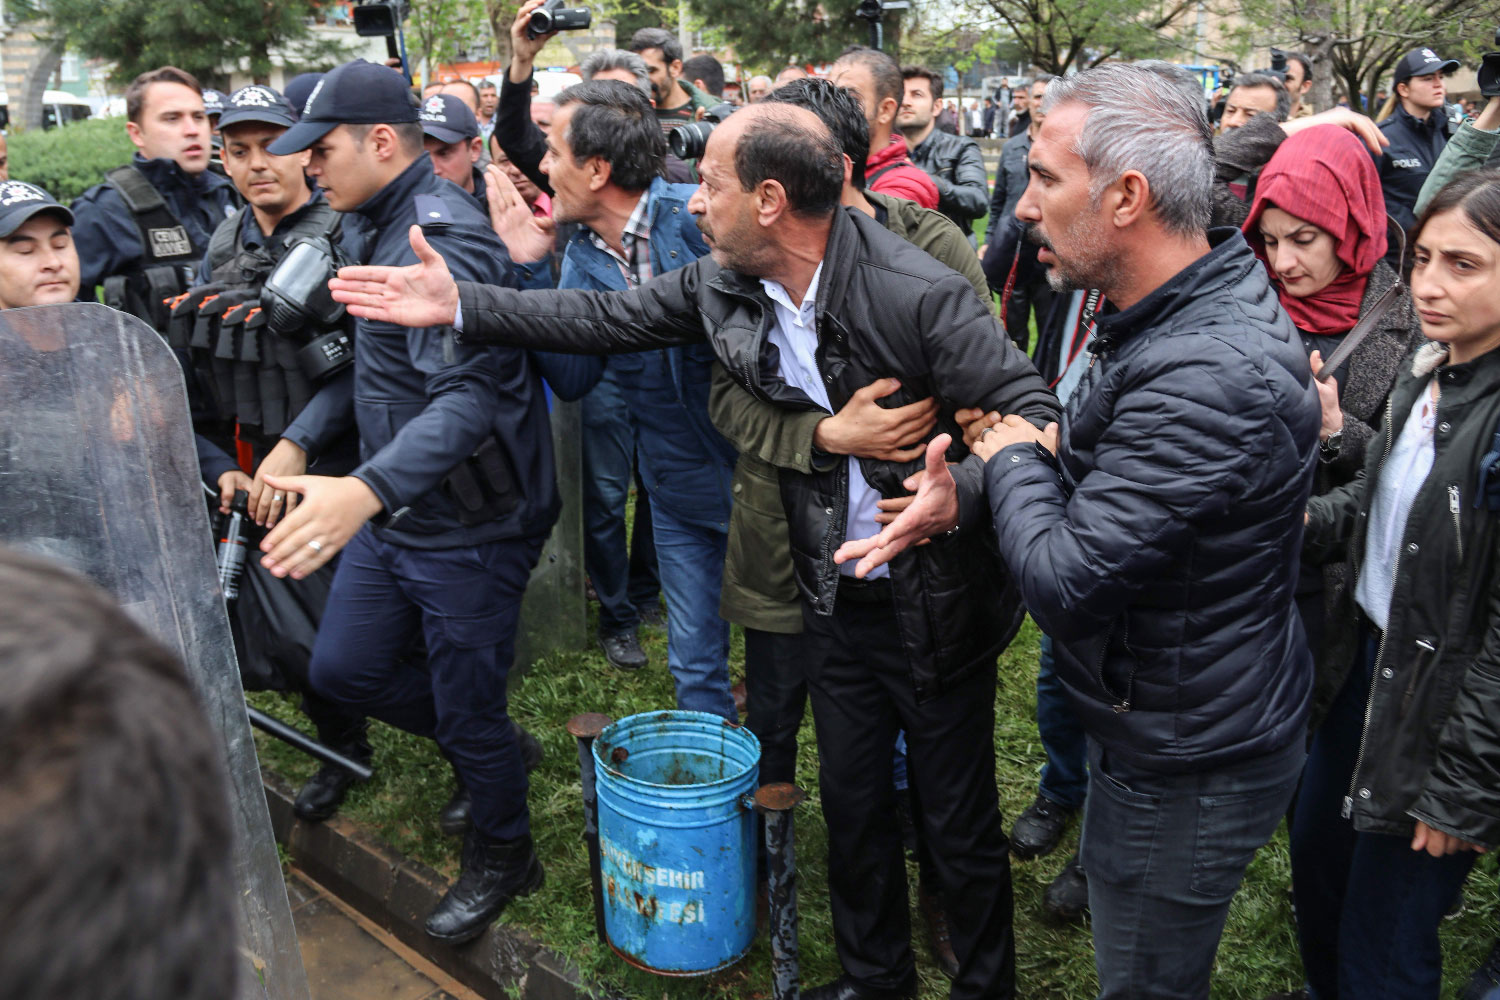 Pro-Kurdish Peoples's Democratic Party (HDP) members discuss with Turkish police during a protest against results of the local elections